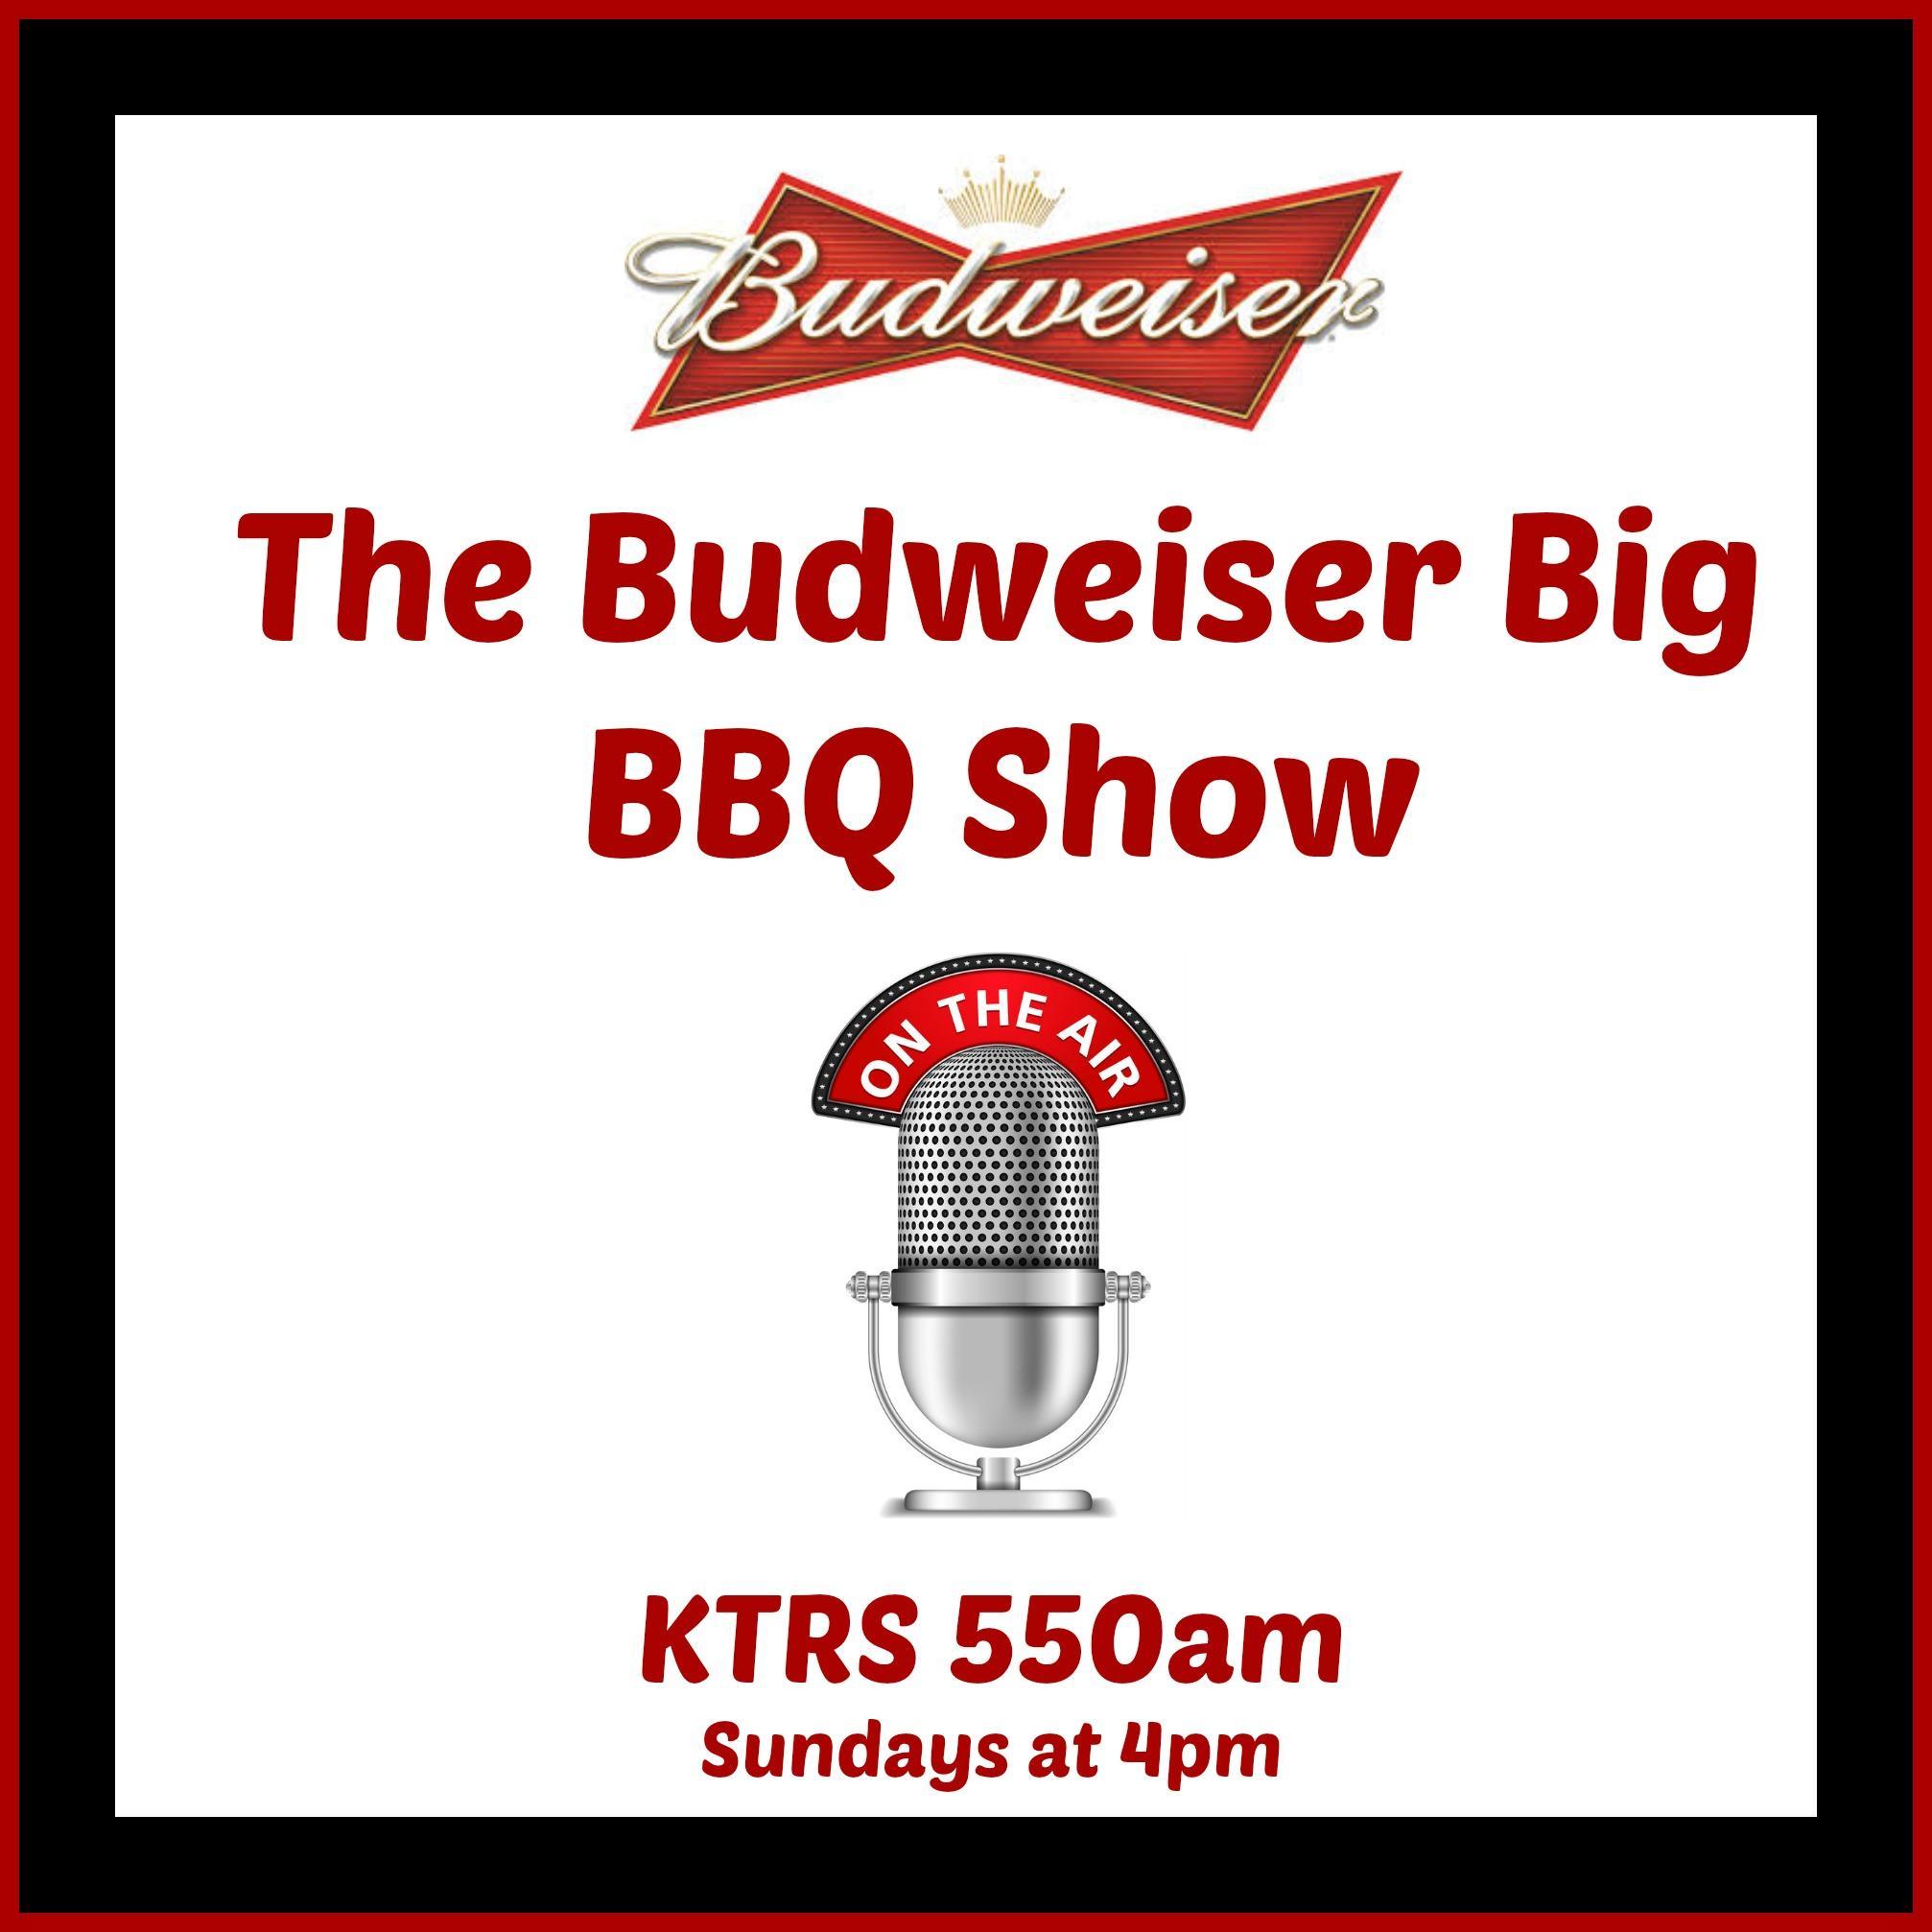 4:00 pm CST on the big 550 KTRS in St. Louis.  Or you can stream live online from anywhere at http://t.co/aEgGTUDsPT.  We talk about all things BBQ!